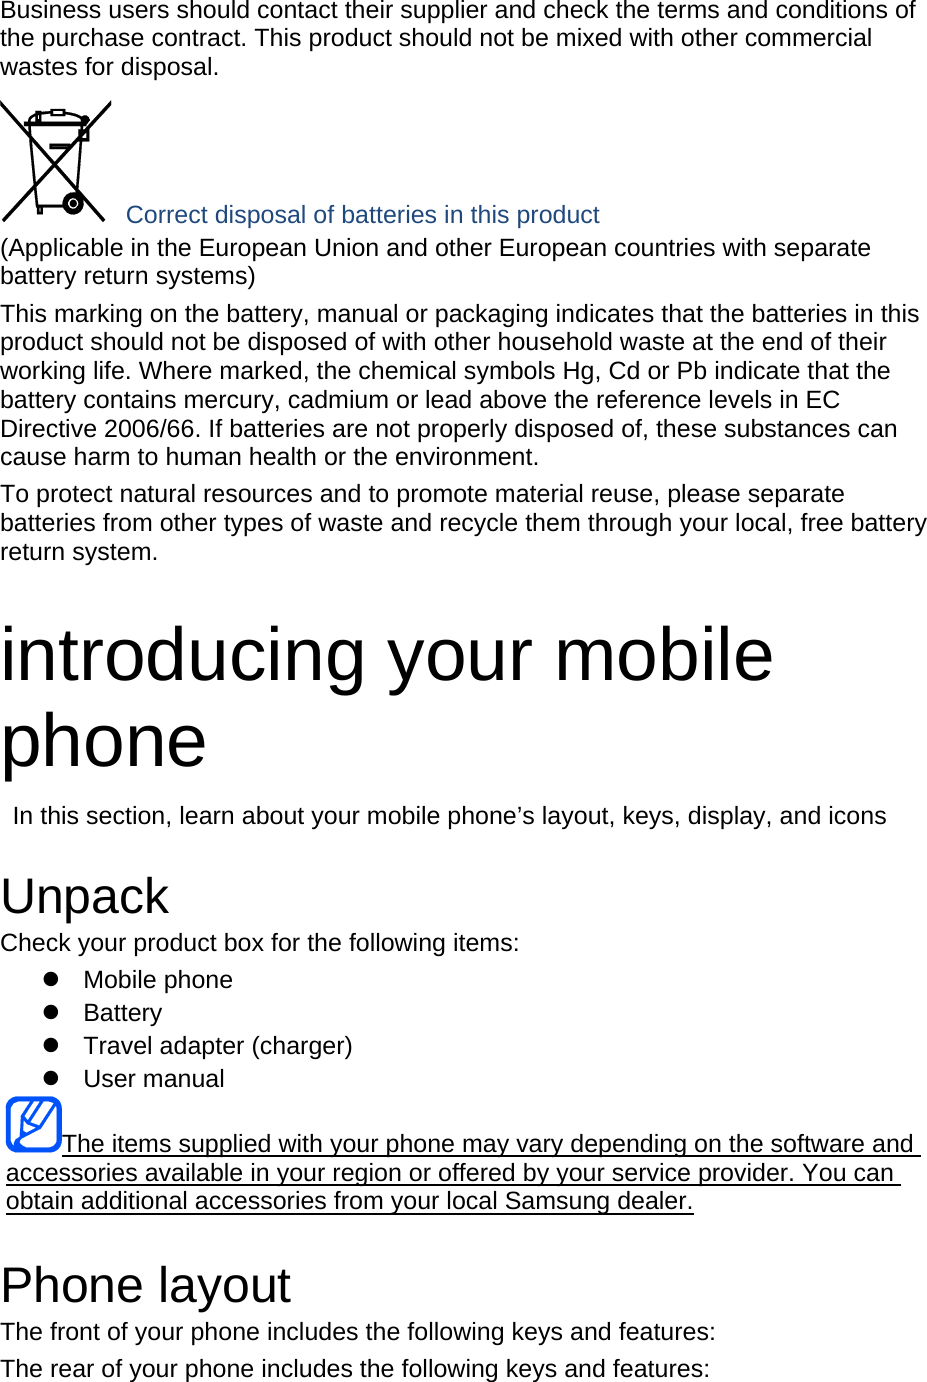   Business users should contact their supplier and check the terms and conditions of the purchase contract. This product should not be mixed with other commercial wastes for disposal.  Correct disposal of batteries in this product (Applicable in the European Union and other European countries with separate battery return systems) This marking on the battery, manual or packaging indicates that the batteries in this product should not be disposed of with other household waste at the end of their working life. Where marked, the chemical symbols Hg, Cd or Pb indicate that the battery contains mercury, cadmium or lead above the reference levels in EC Directive 2006/66. If batteries are not properly disposed of, these substances can cause harm to human health or the environment. To protect natural resources and to promote material reuse, please separate batteries from other types of waste and recycle them through your local, free battery return system.  introducing your mobile phone   In this section, learn about your mobile phone’s layout, keys, display, and icons  Unpack Check your product box for the following items:  Mobile phone  Battery   Travel adapter (charger)  User manual The items supplied with your phone may vary depending on the software and accessories available in your region or offered by your service provider. You can obtain additional accessories from your local Samsung dealer.  Phone layout The front of your phone includes the following keys and features: The rear of your phone includes the following keys and features: 